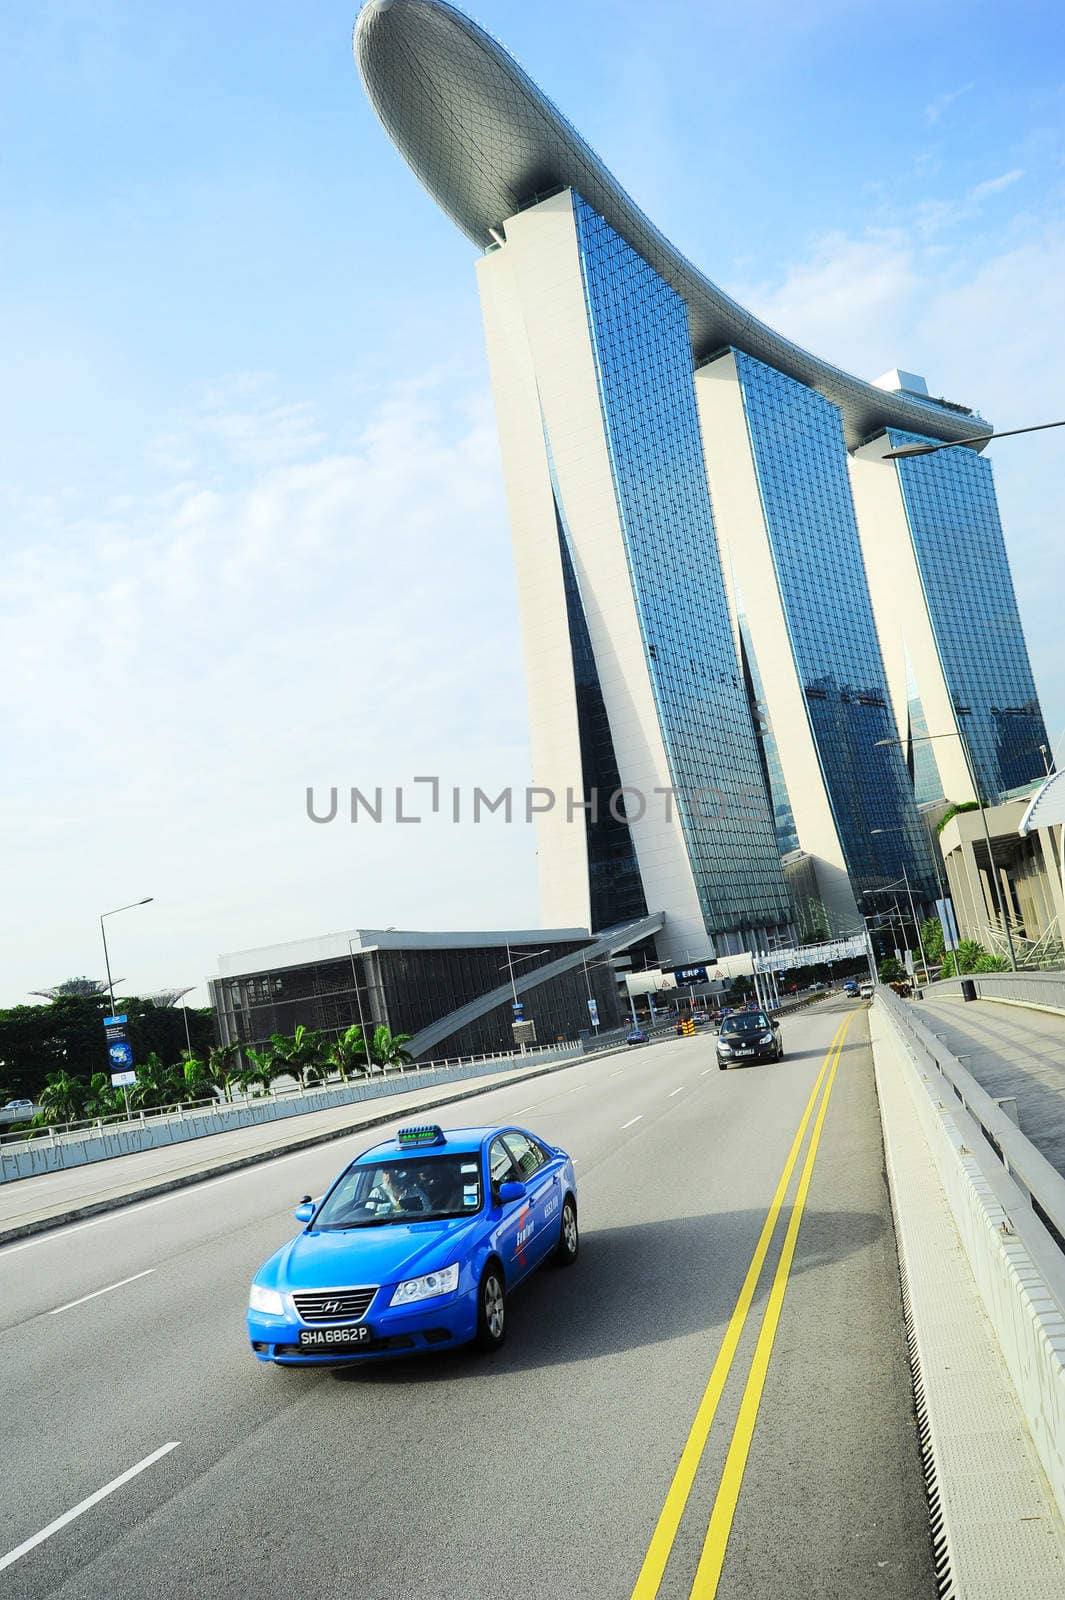 Singapoer, Republic of Singapore - May 09, 2013: Taxi cab driving by the road in front of Marina Bay Sands hotel in Singapore. The government will spend SGP$14 billion to improve Singapore's road infrastructure